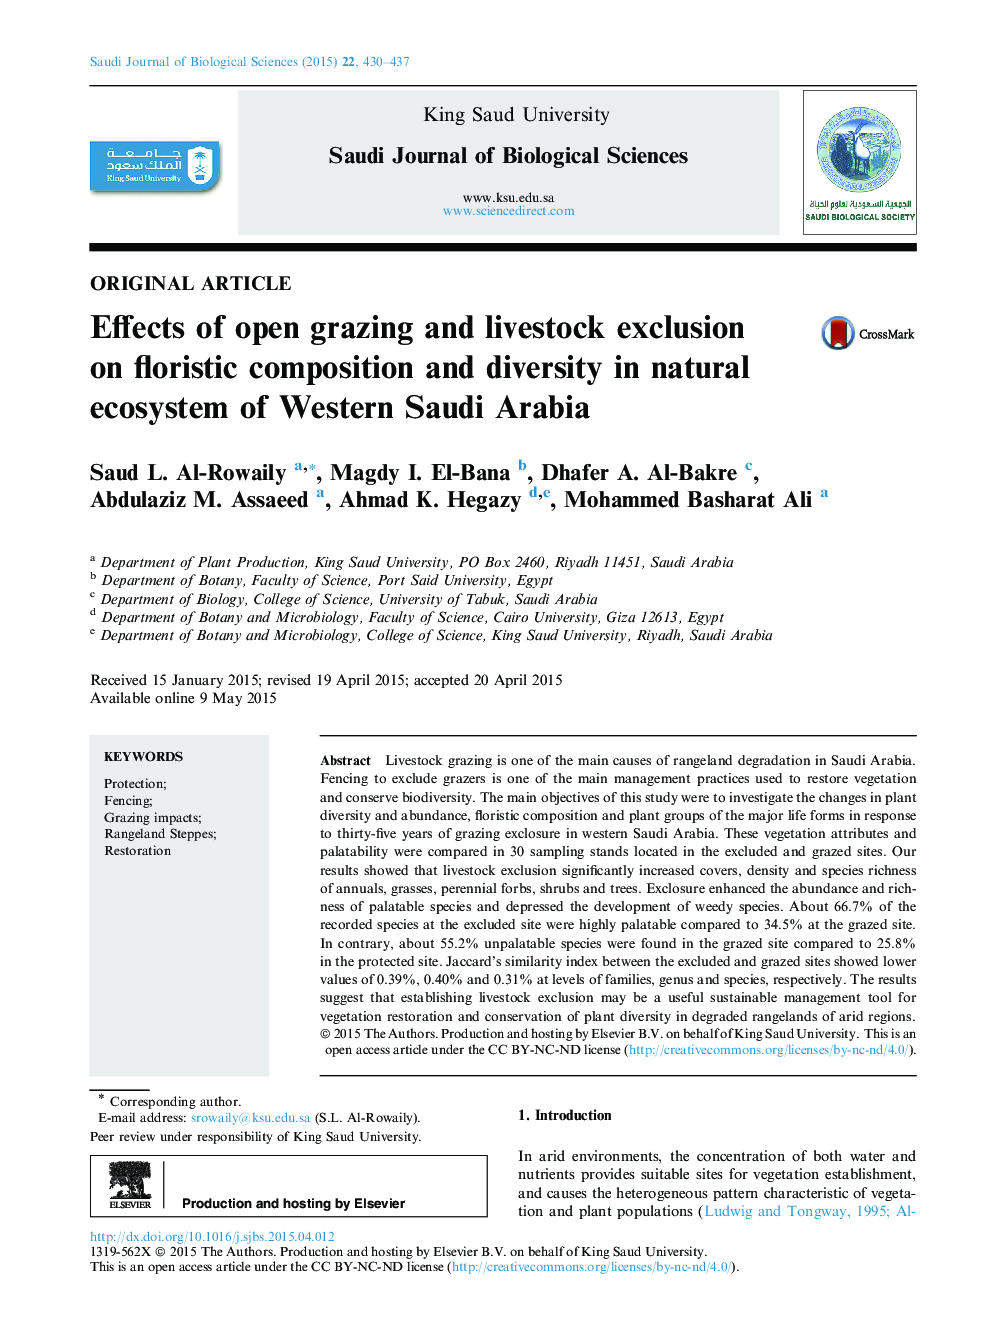 Effects of open grazing and livestock exclusion on floristic composition and diversity in natural ecosystem of Western Saudi Arabia 